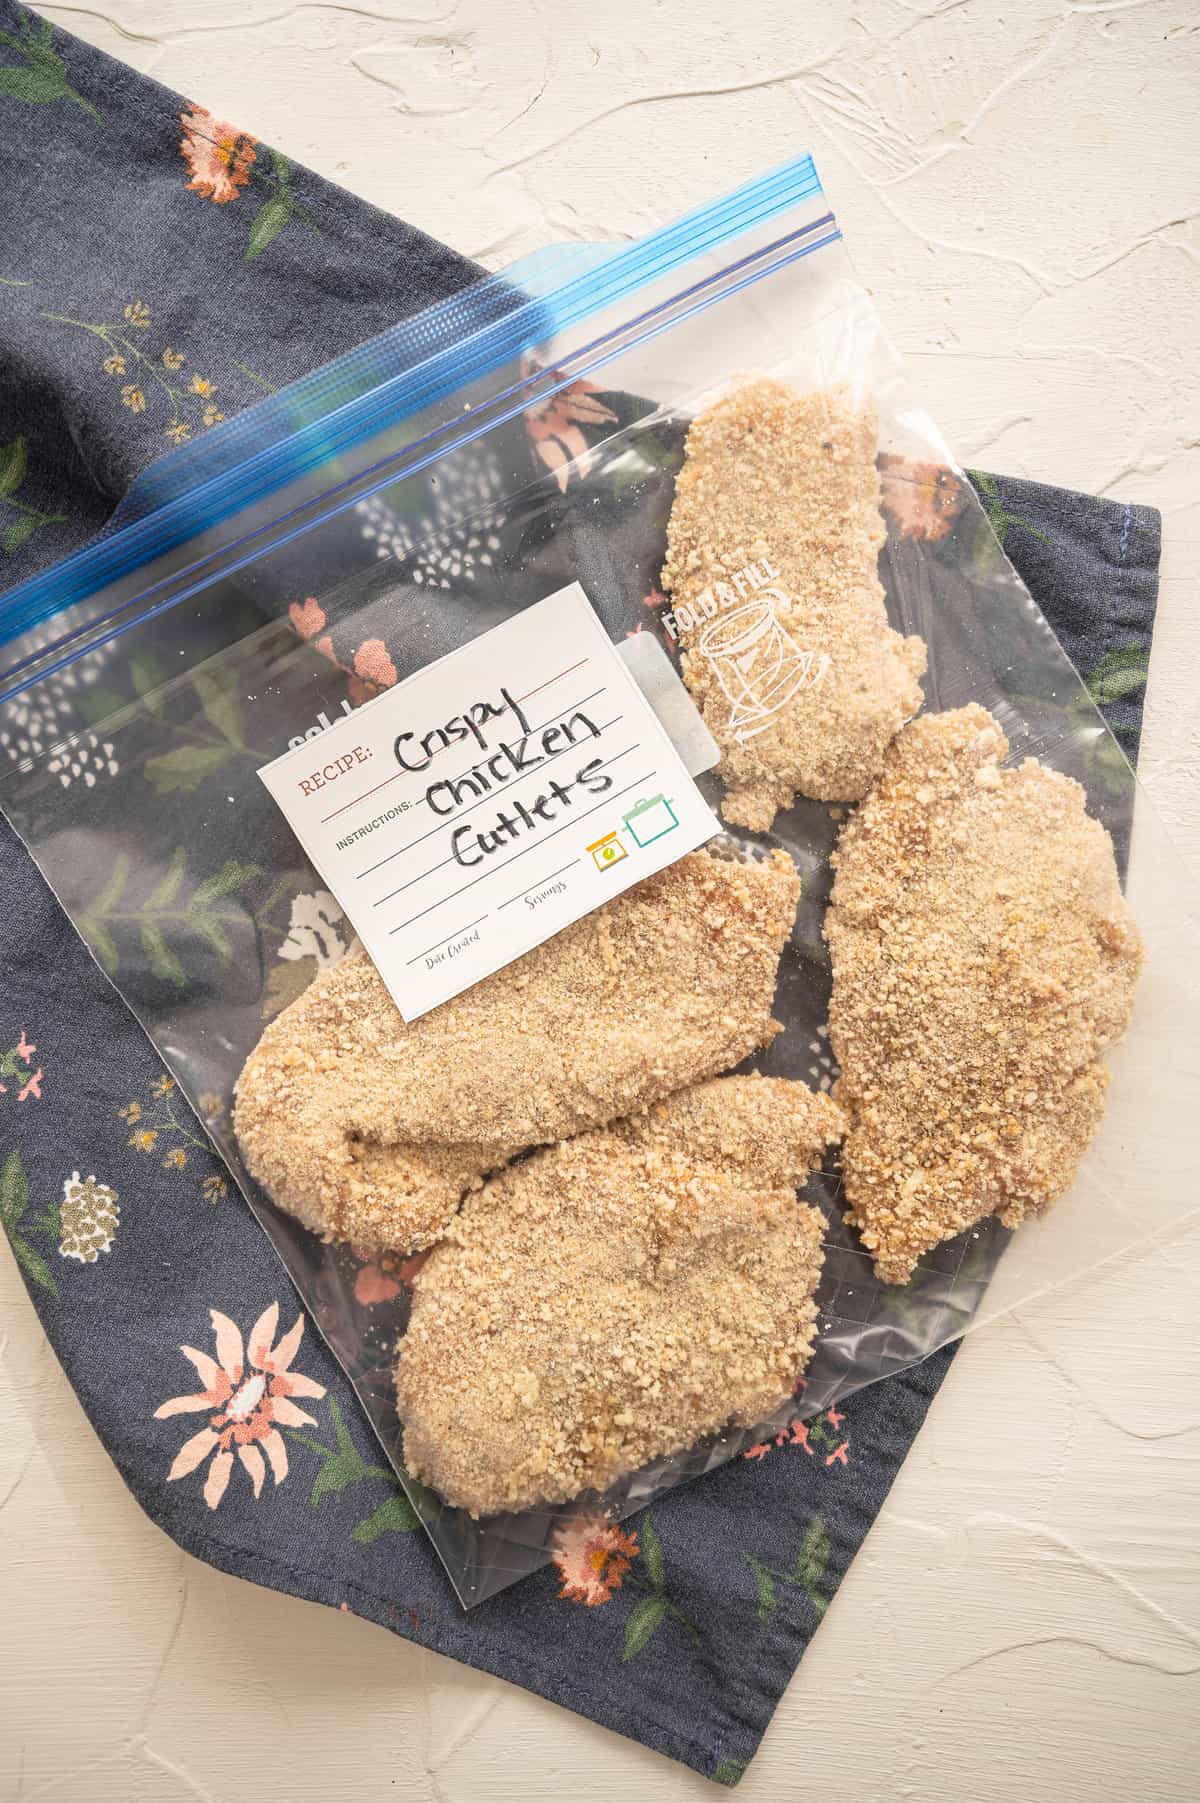 Uncooked breaded chicken cutlets in a freezer bag labeled Crispy Chicken Cutlets.